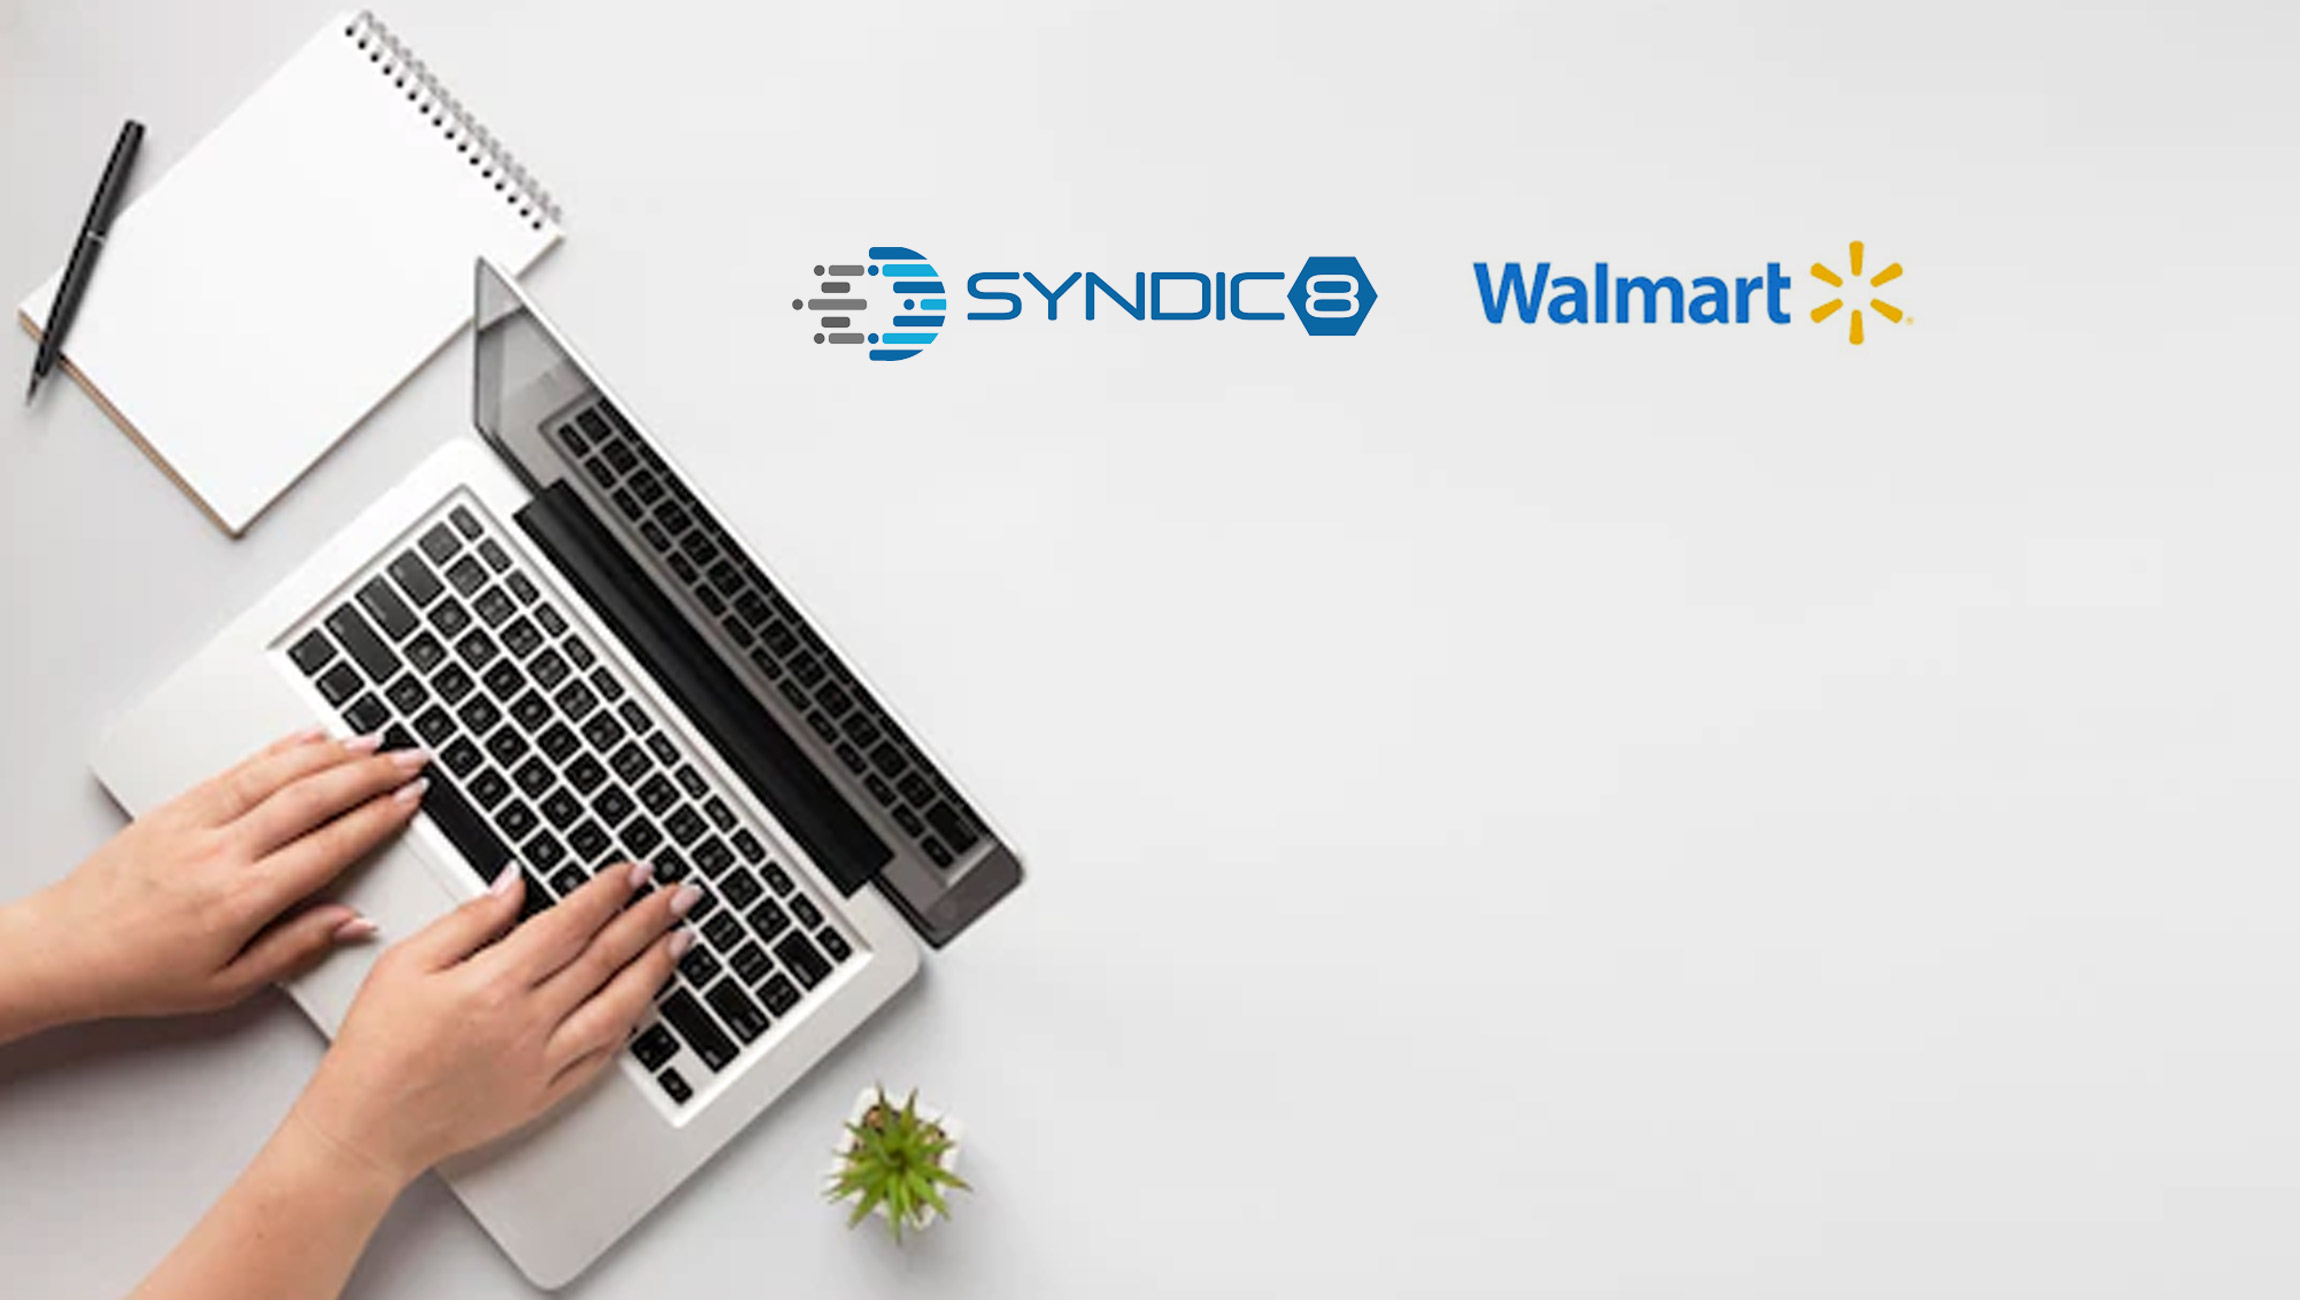 Syndic8 Offers Enhanced Product Content on Walmart